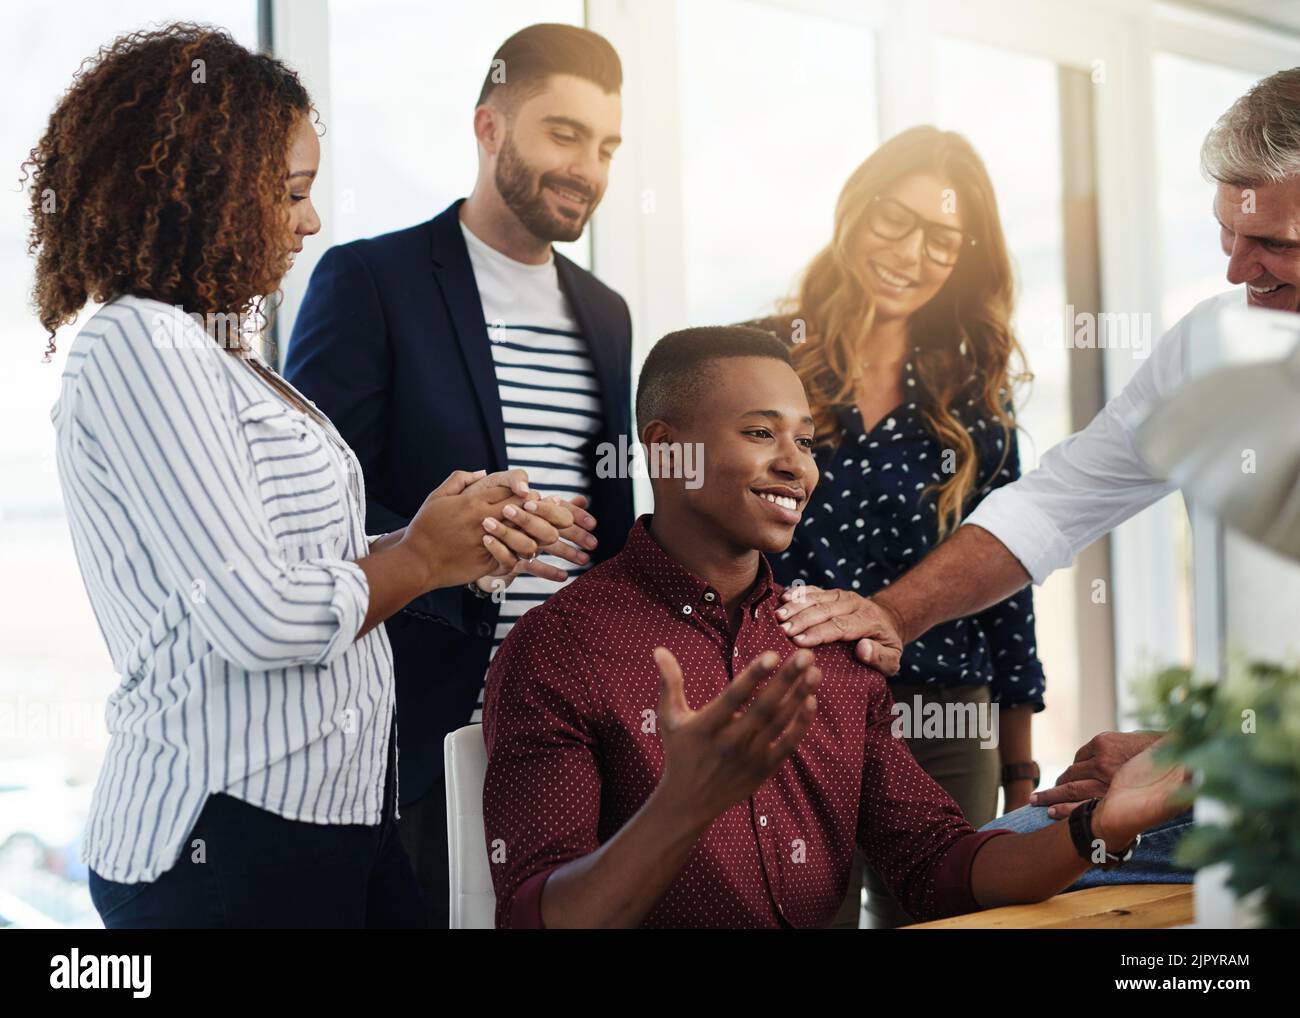 They can always depend on him. a group of designers working together. Stock Photo